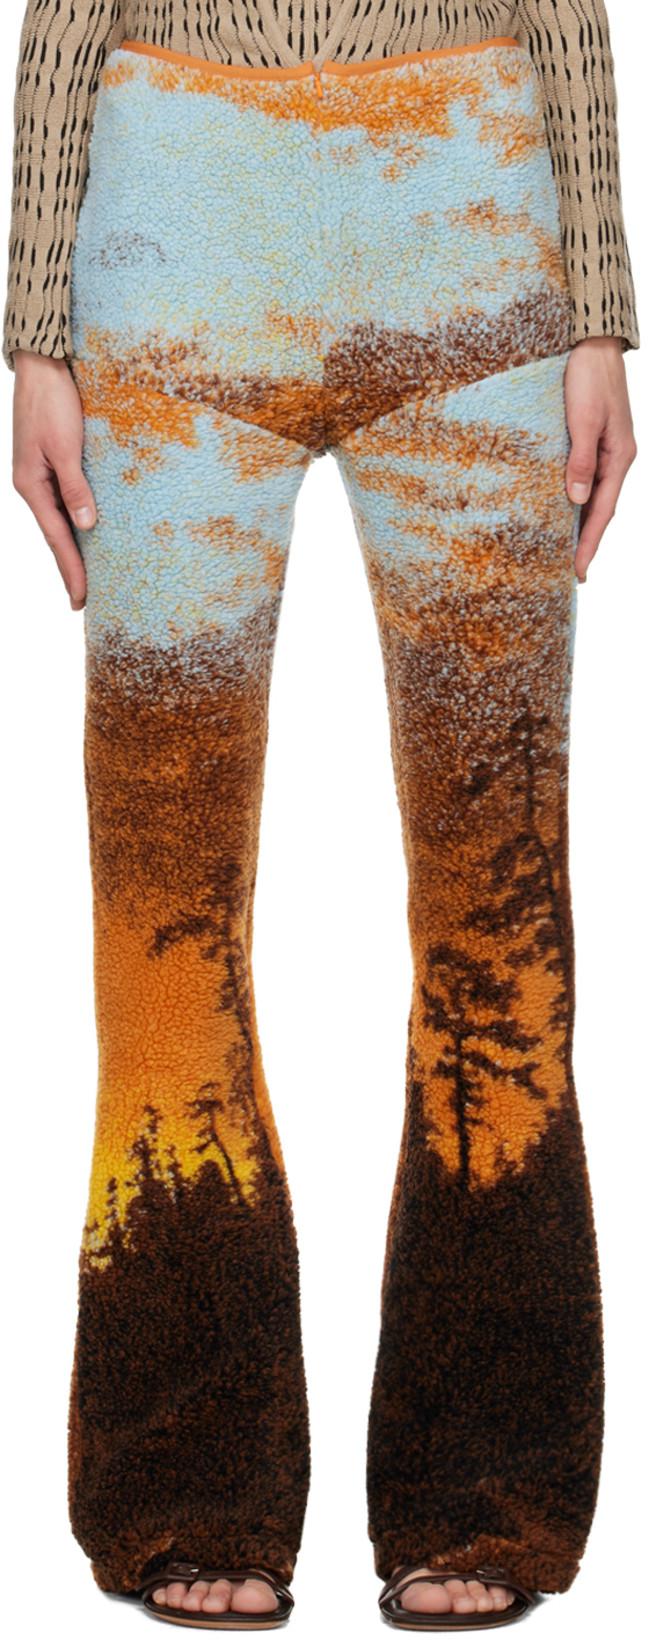 SSENSE Exclusive Orange Lounge Pants by CONNER IVES